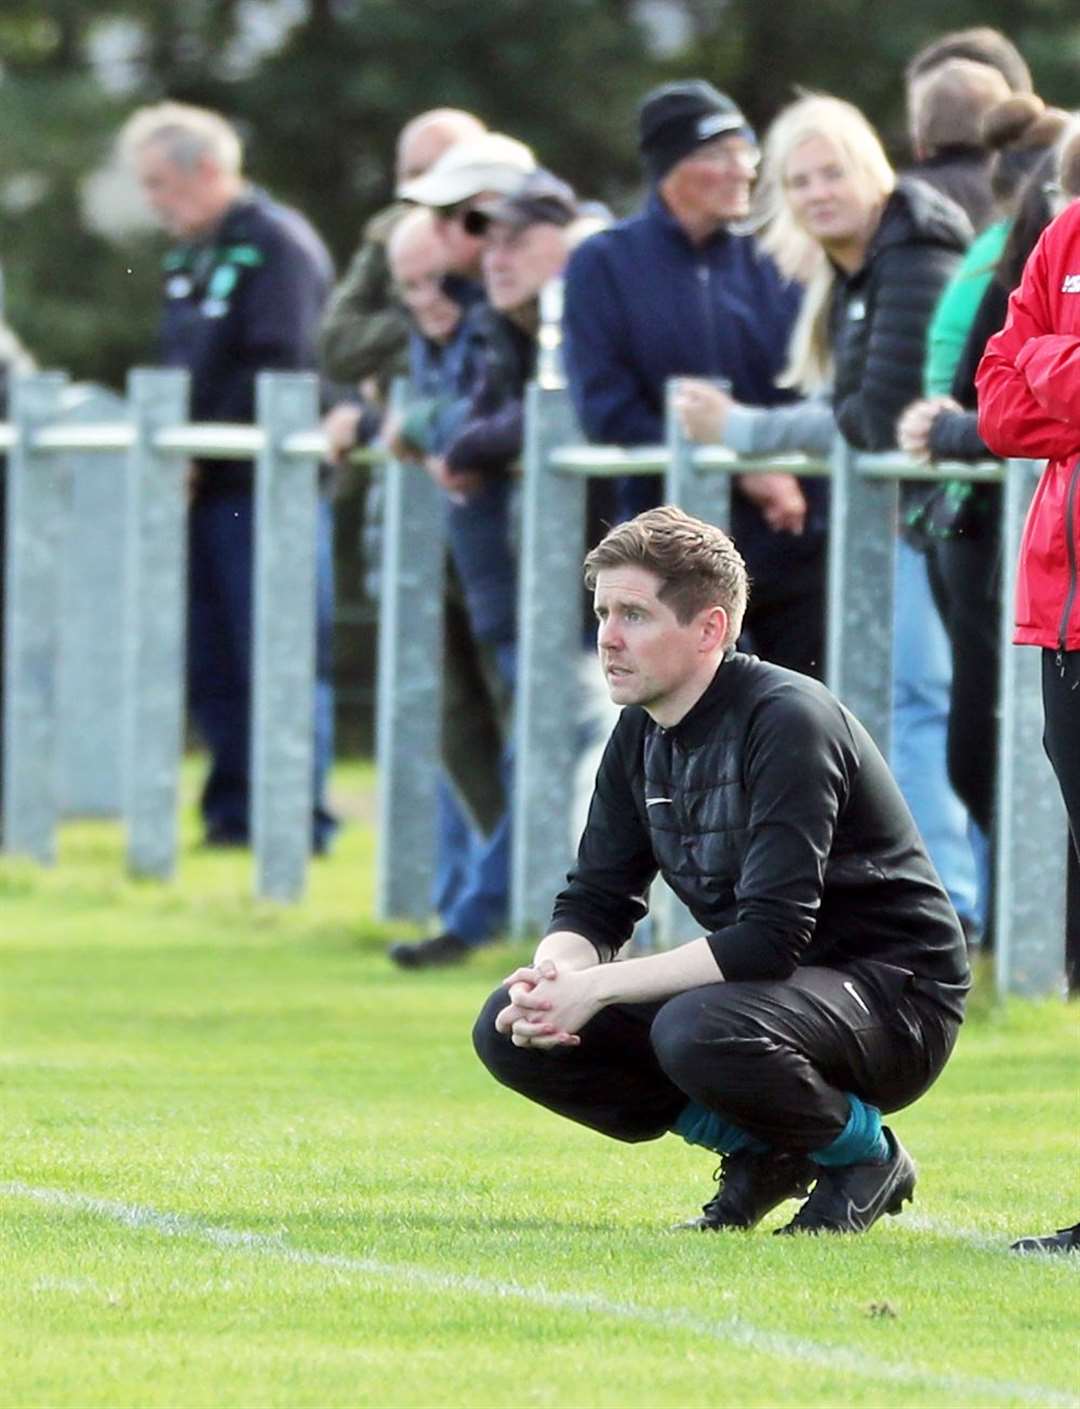 Ewan McElroy said Halkirk United looked 'much sharper and slicker' in the cup clash at Alness. Picture: James Gunn